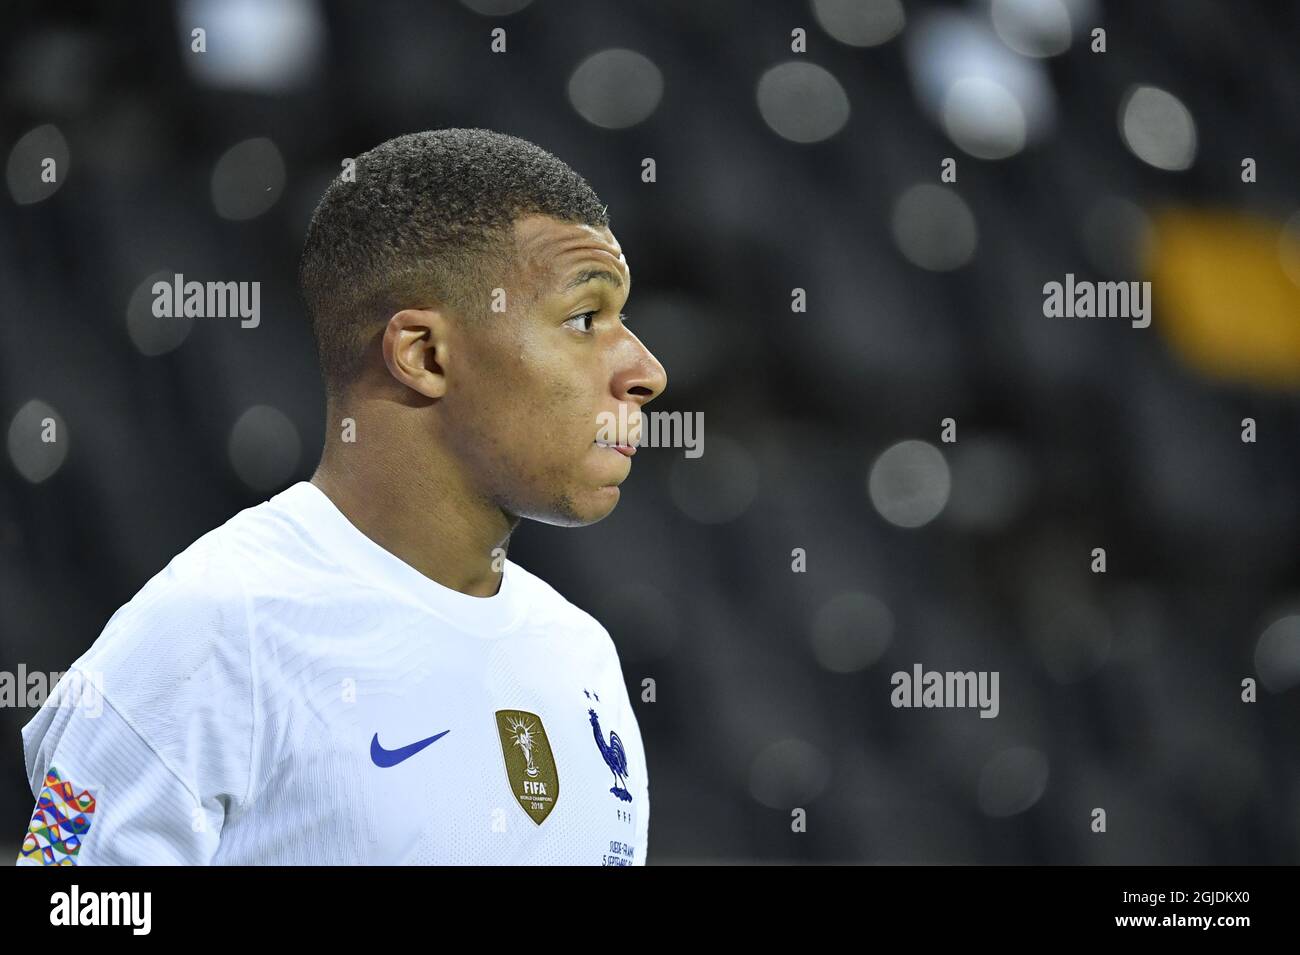 France´s Kylian Mbappé during the UEFA Nations League football match  between Sweden and France at Friends Arena in Stockholm, Sweden September  05, 2020. Photo: Jessica Gow / TT kod 10070 Stock Photo - Alamy